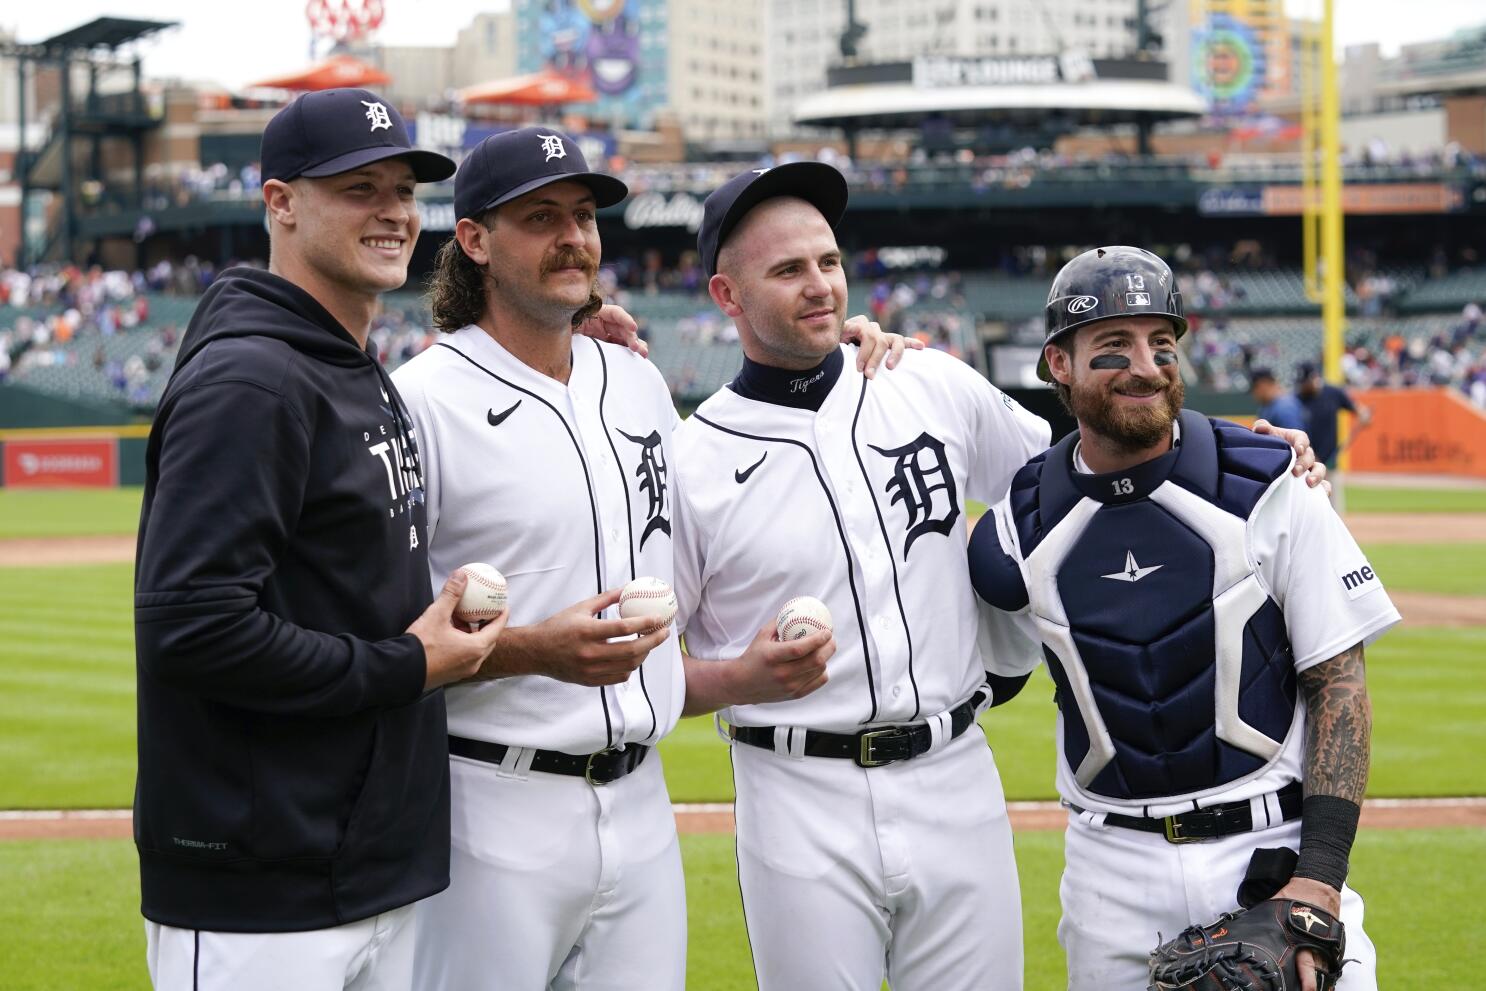 Detroit Tigers and Possible Alternate Uniforms